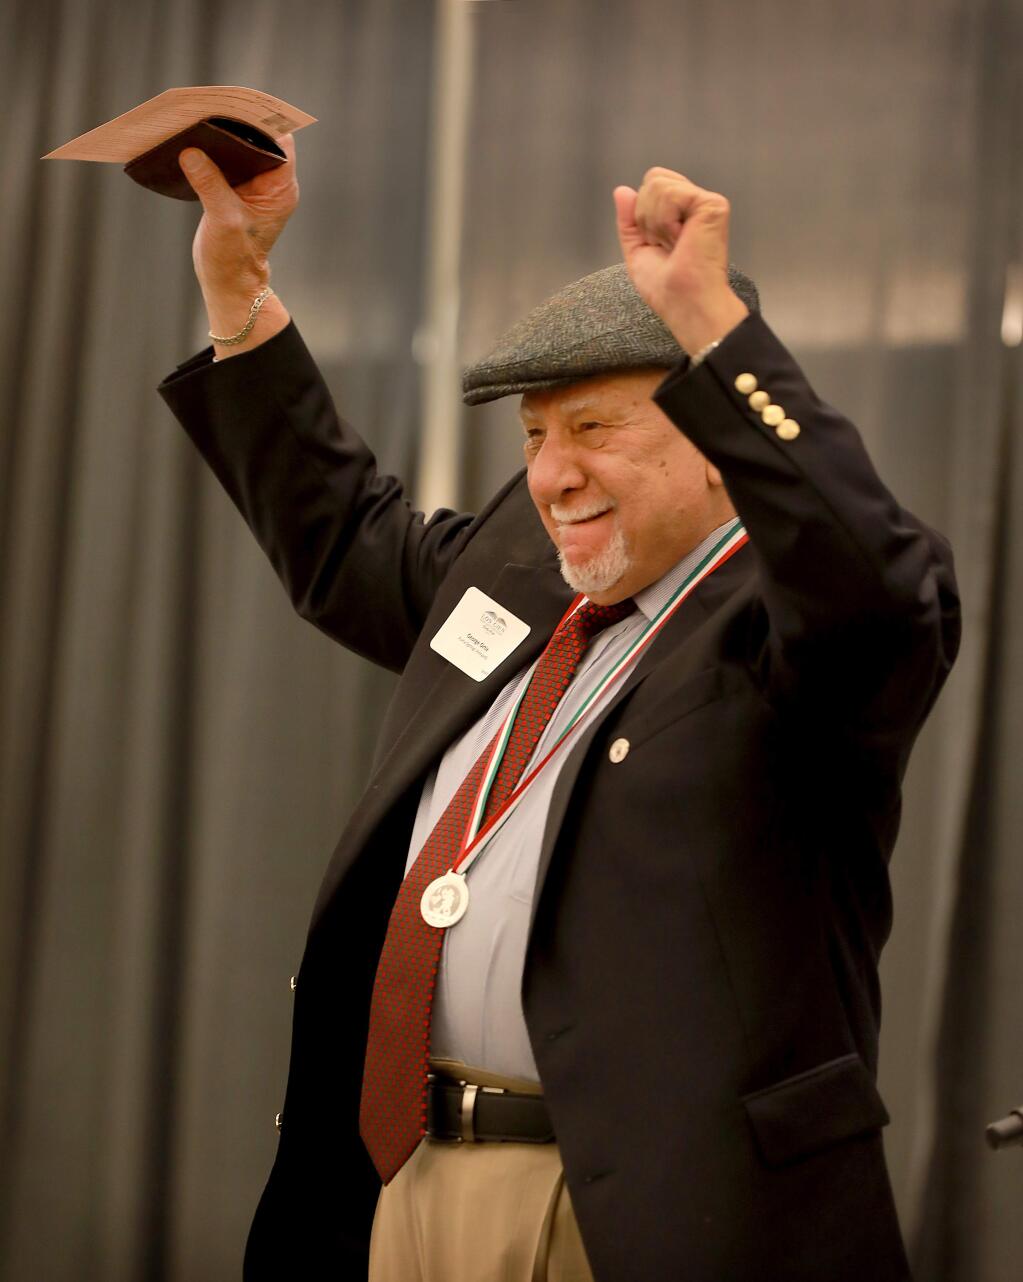 Local farmworker advocate George Ortiz wears the OHTLI Award medal presented to him by Mexico Consul General Gemi Gonzalez Lopez at the 5th annual Los Cien State of the Latino Community forum at Sonoma State University on Thursday. (photo by John Burgess/The Press Democrat)